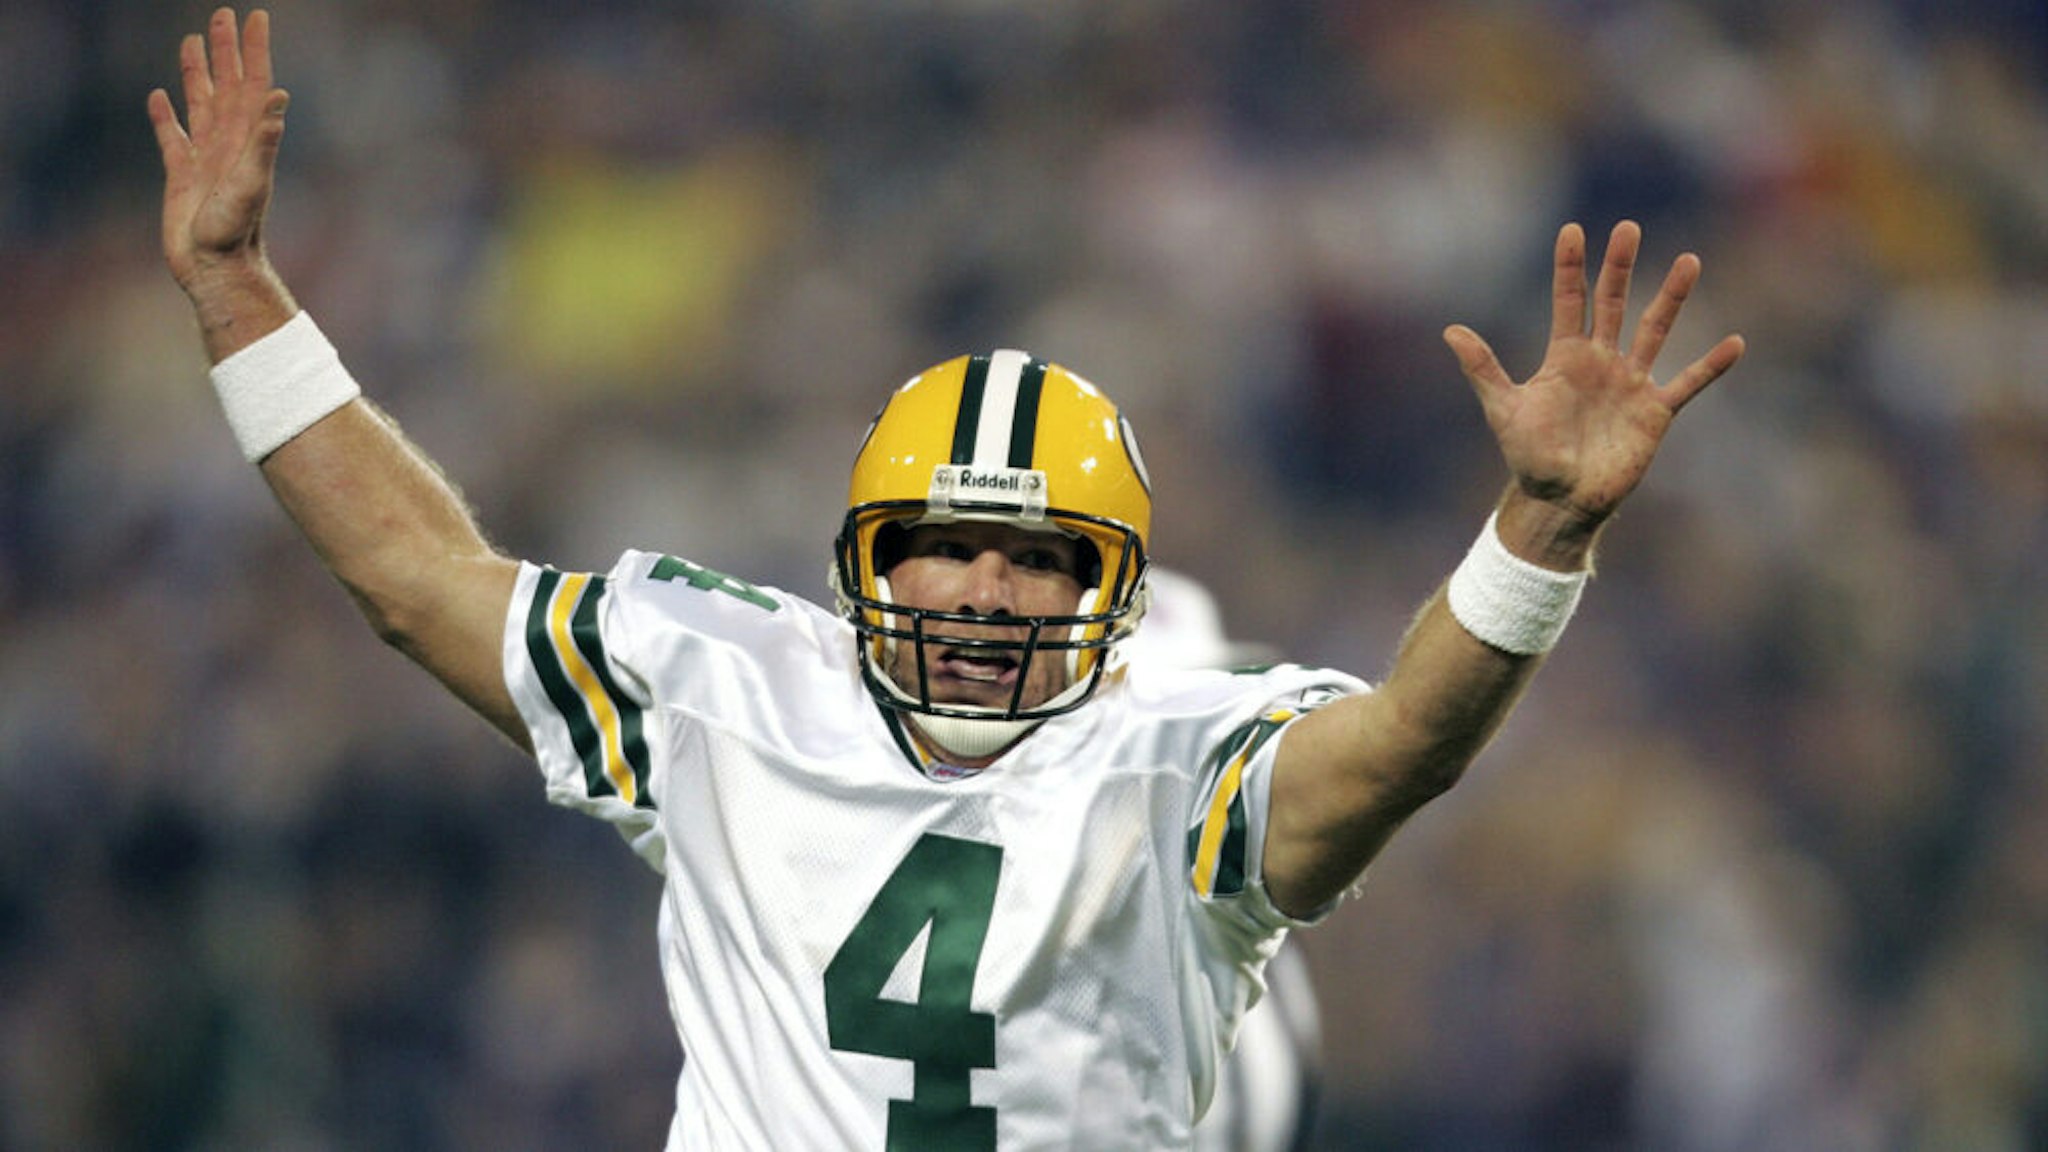 Sep 30, 2007 - Seattle, WA, USA - NFL FOOTBALL: Green Bay Packers quarterback #4 BRETT FAVRE celebrates as he races to the end zone after his record-setting touchdown pass to wide receiver Greg Jennings in first quarter of football game against the Minnesota Vikings. Favre set the NFL record for career touchdown passes at 421 surpassing Dan Marino Minnesota Vikings at Metrodome in Minneapolis, Minn. The Packers won 23-16.